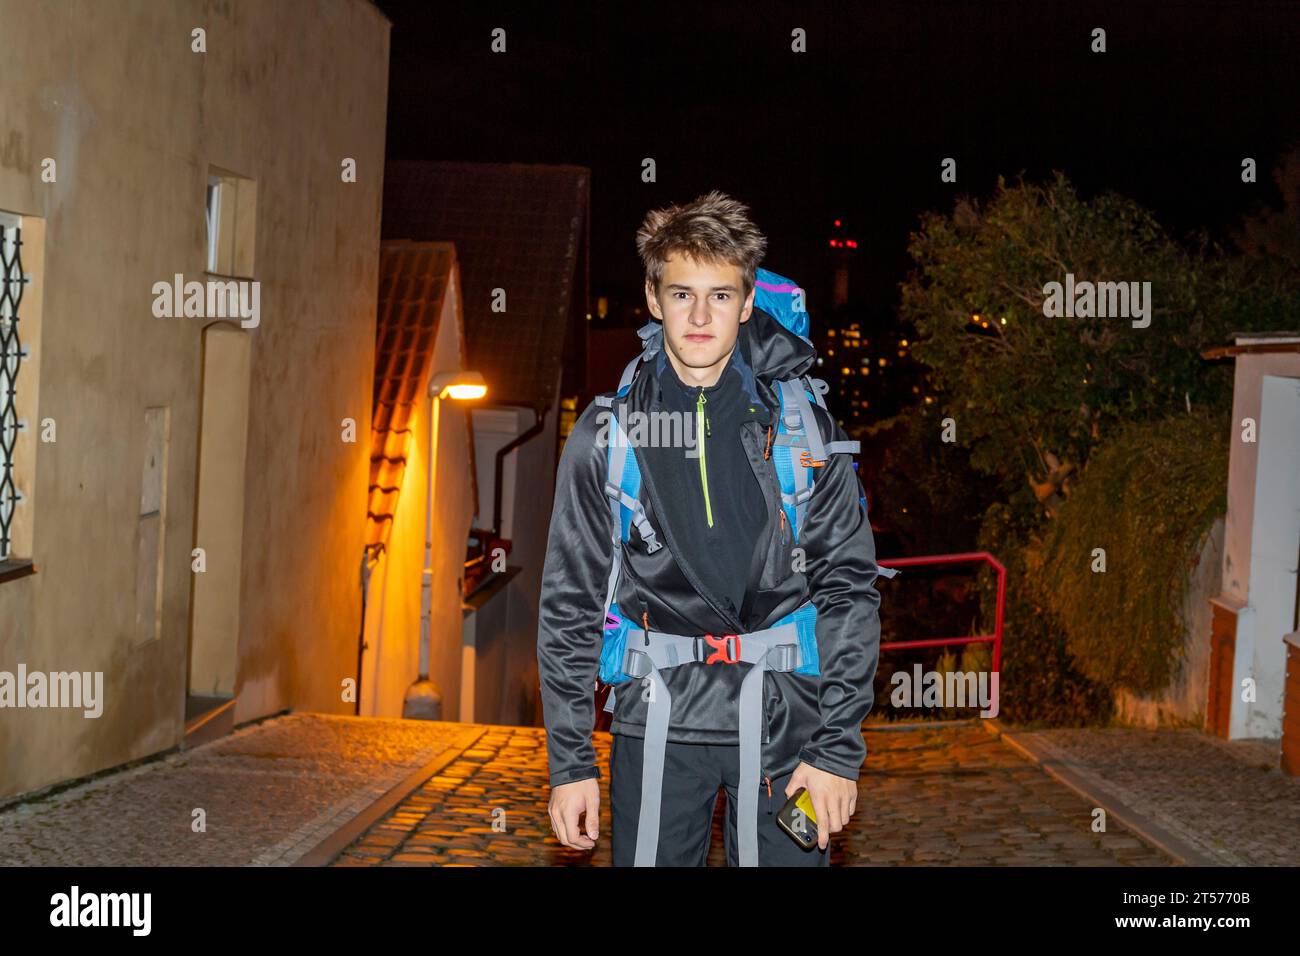 blond boy-teenager starting out on the trip in the night with rucksack and mobile phone Stock Photo